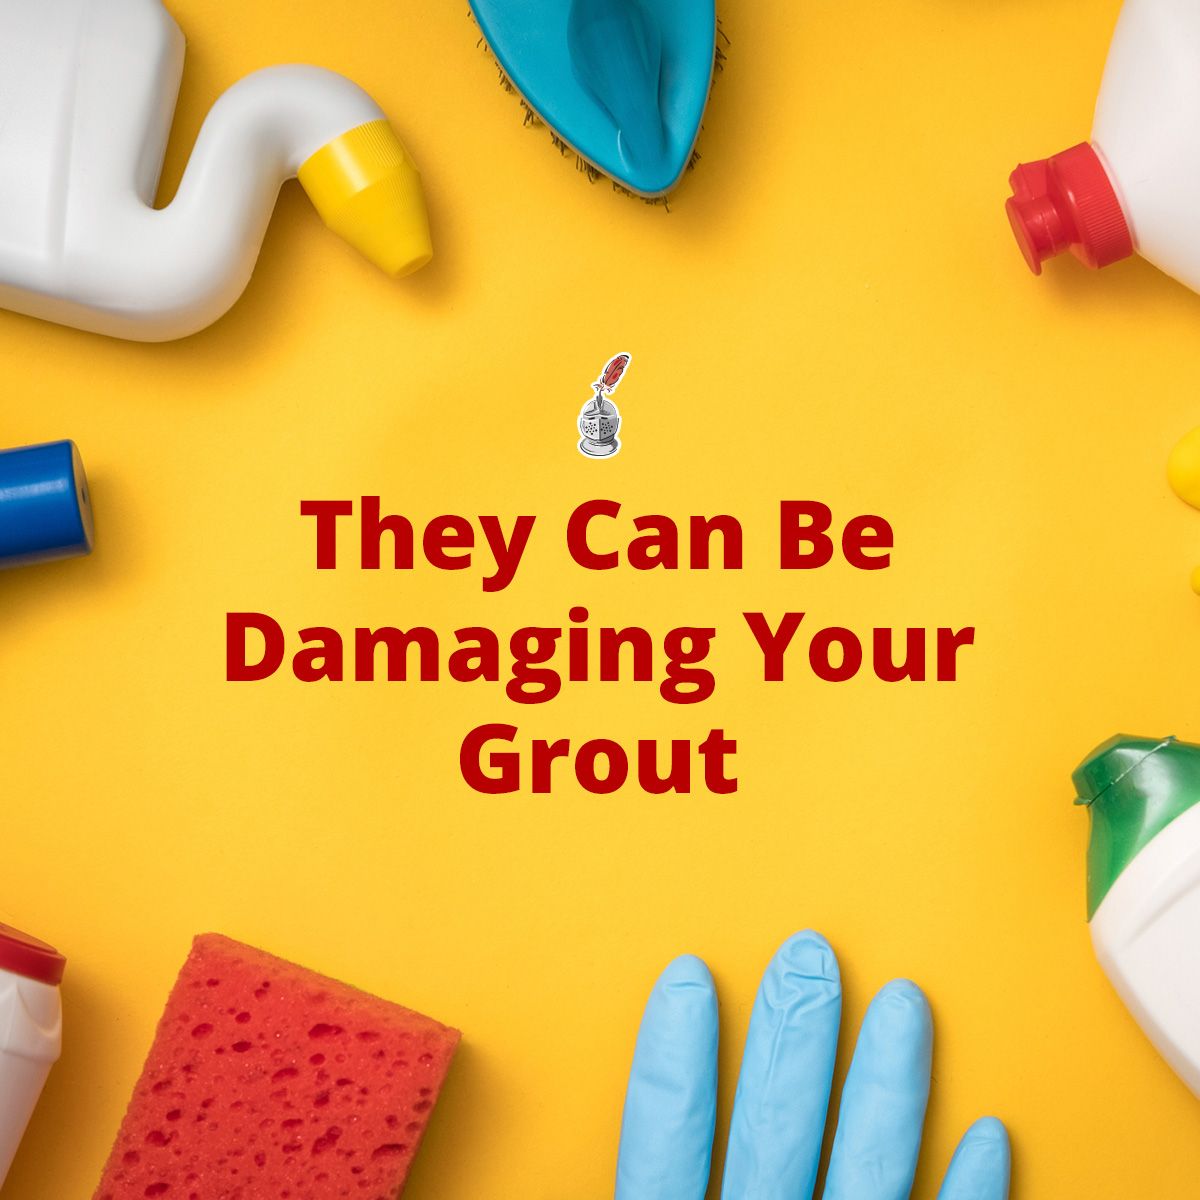 They Can Be Damaging Your Grout